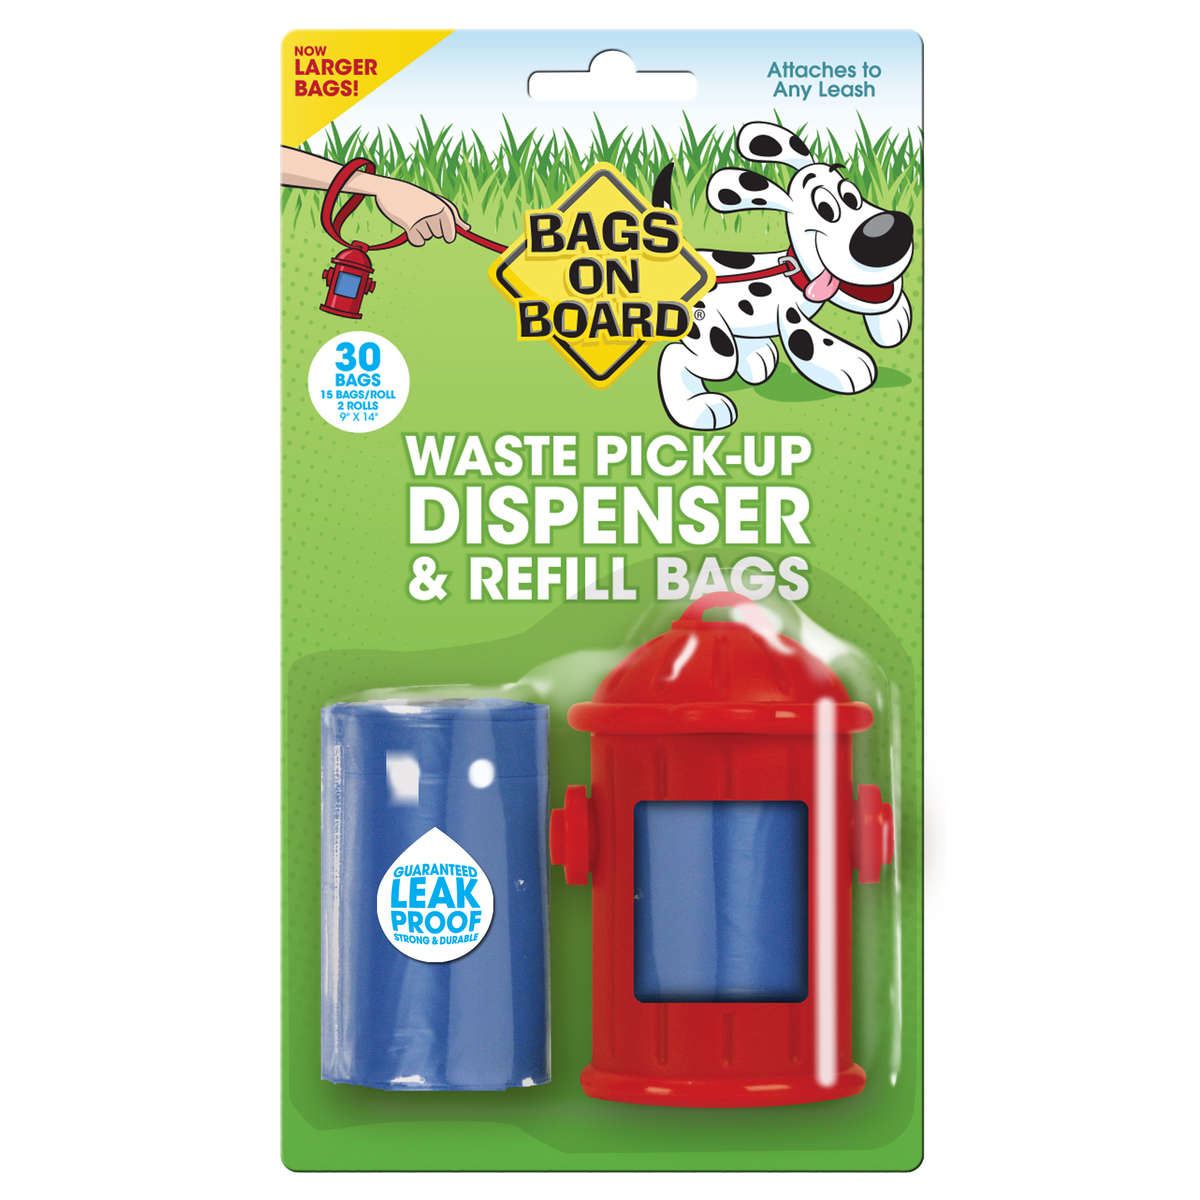 Fire Hydrant Dispenser and Pick-up Bags 30 bags